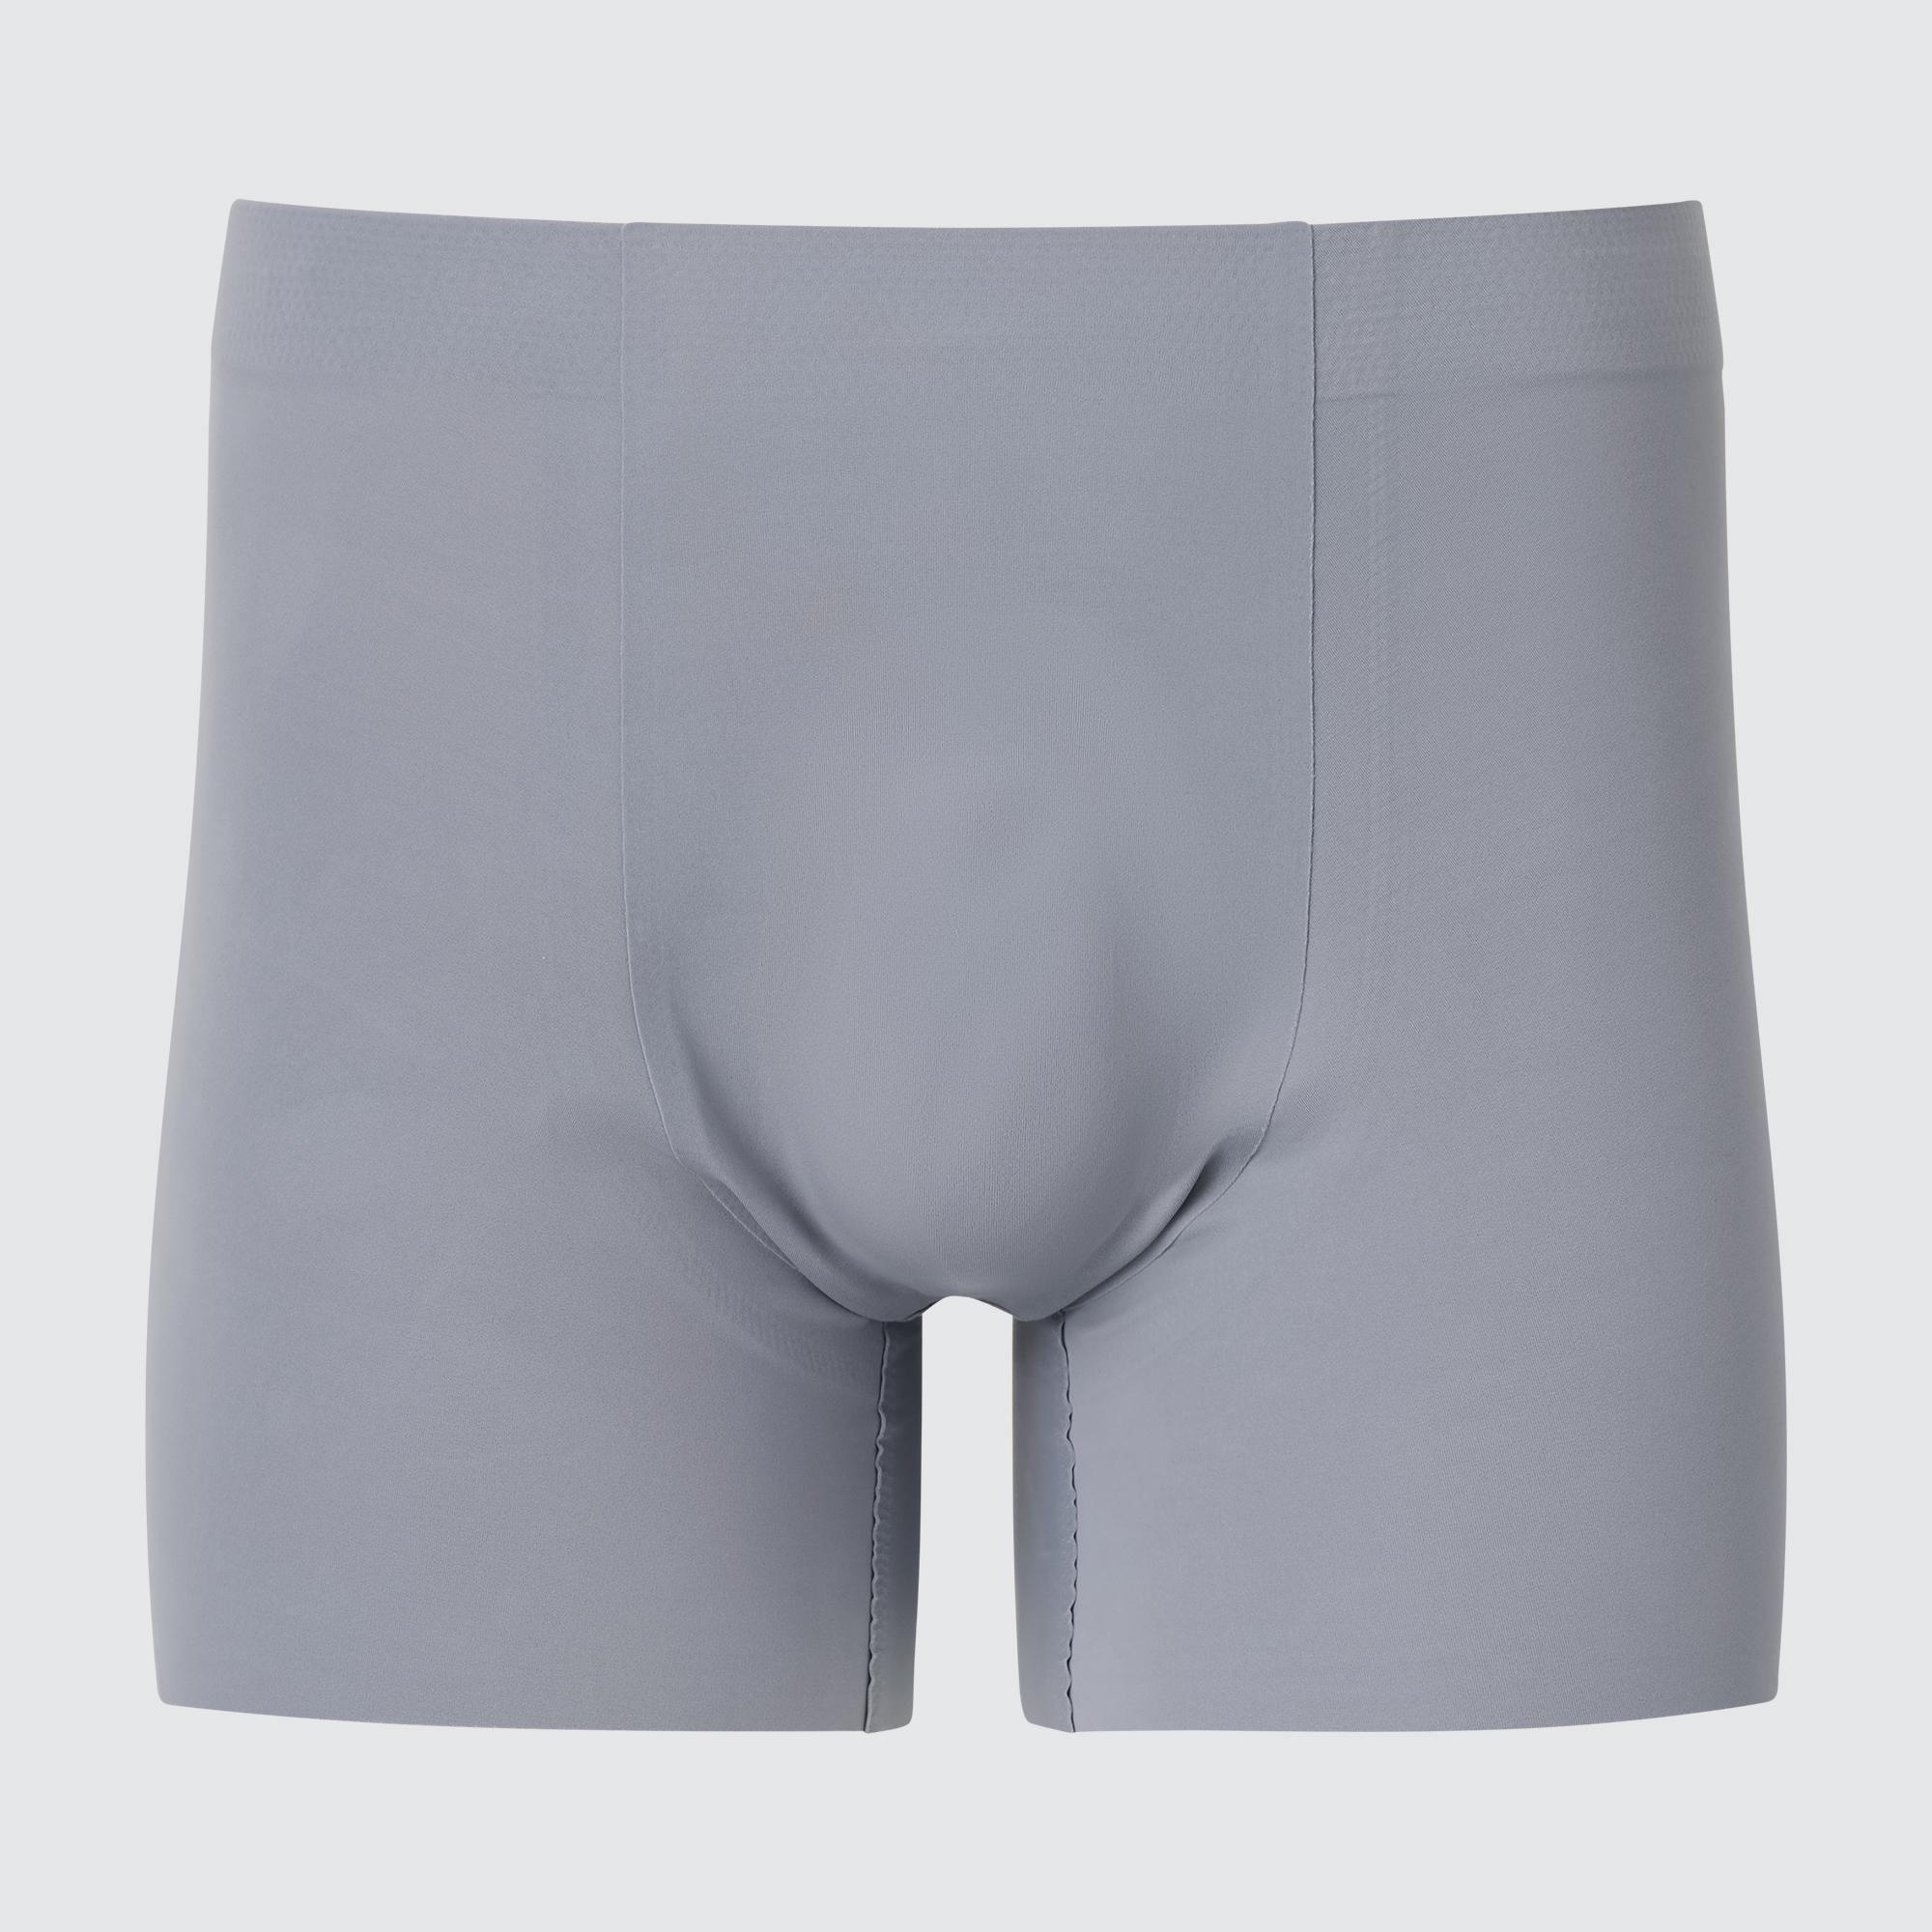  Underwear - Clothing: Clothing, Shoes & Accessories: Boxer Briefs,  Briefs, Thermal, Boxers & More